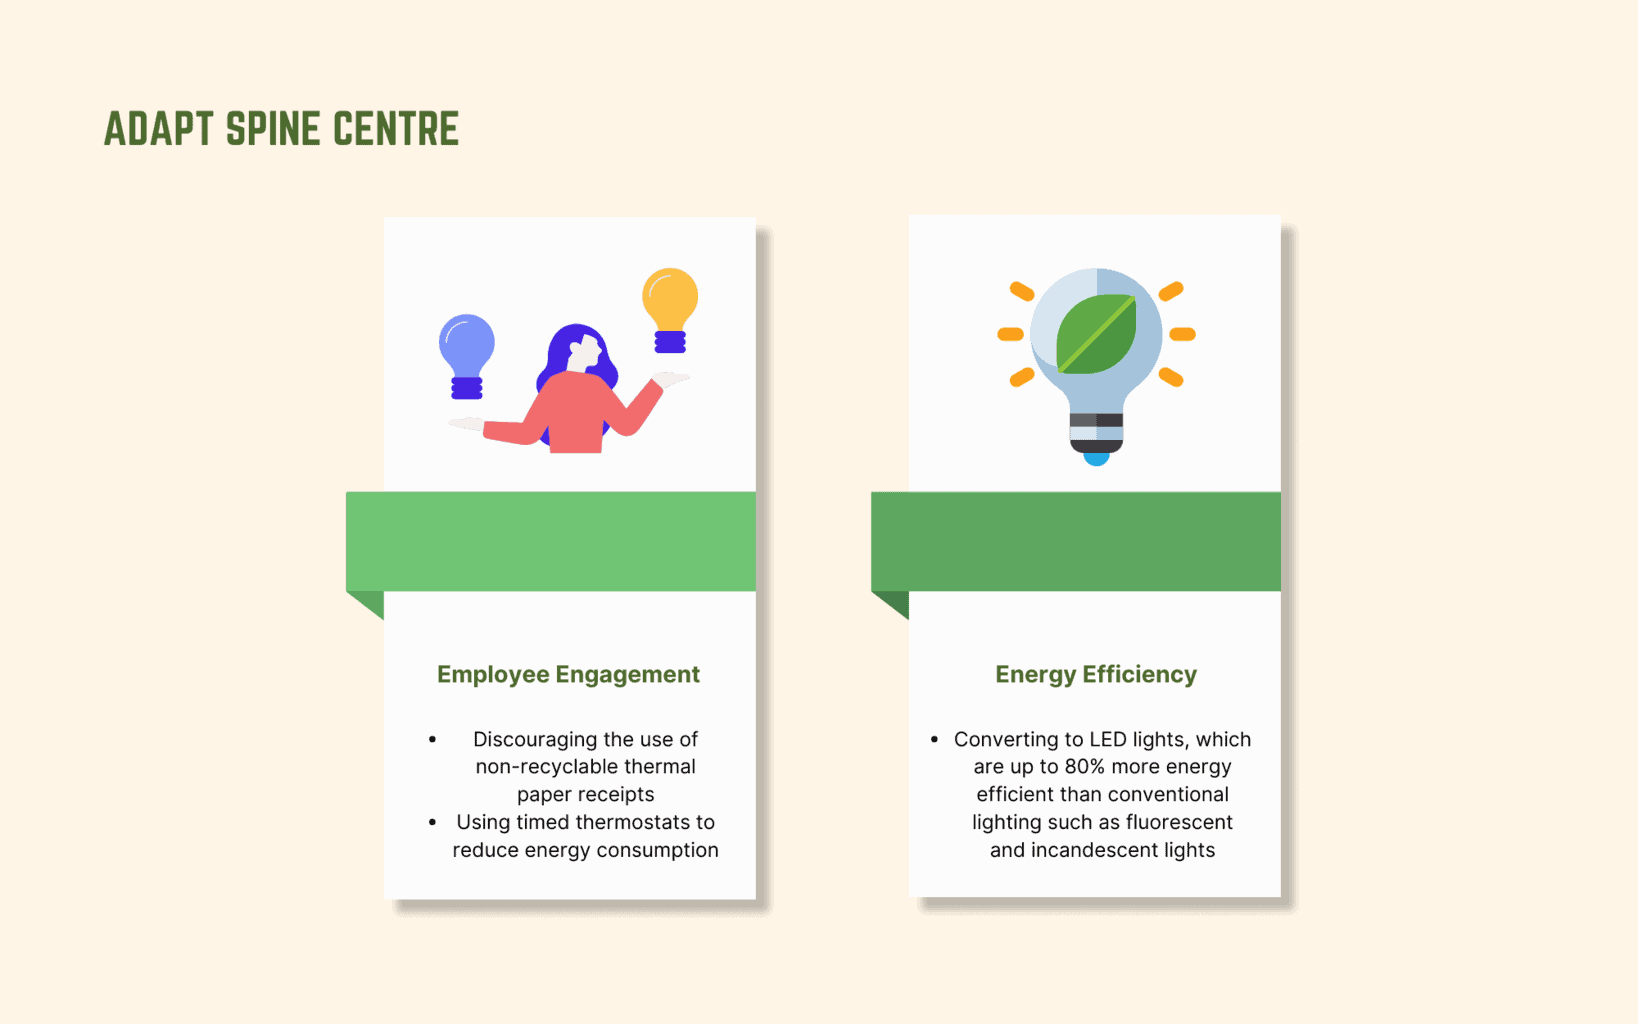 Adapt Spine Centre's green practices include: Discouraging the use of non-recyclable thermal paper receipts, Using timed thermostats to reduce energy consumption, Converting to LED lights, which are up to 80% more energy efficient than conventional lighting such as fluorescent and incandescent lights